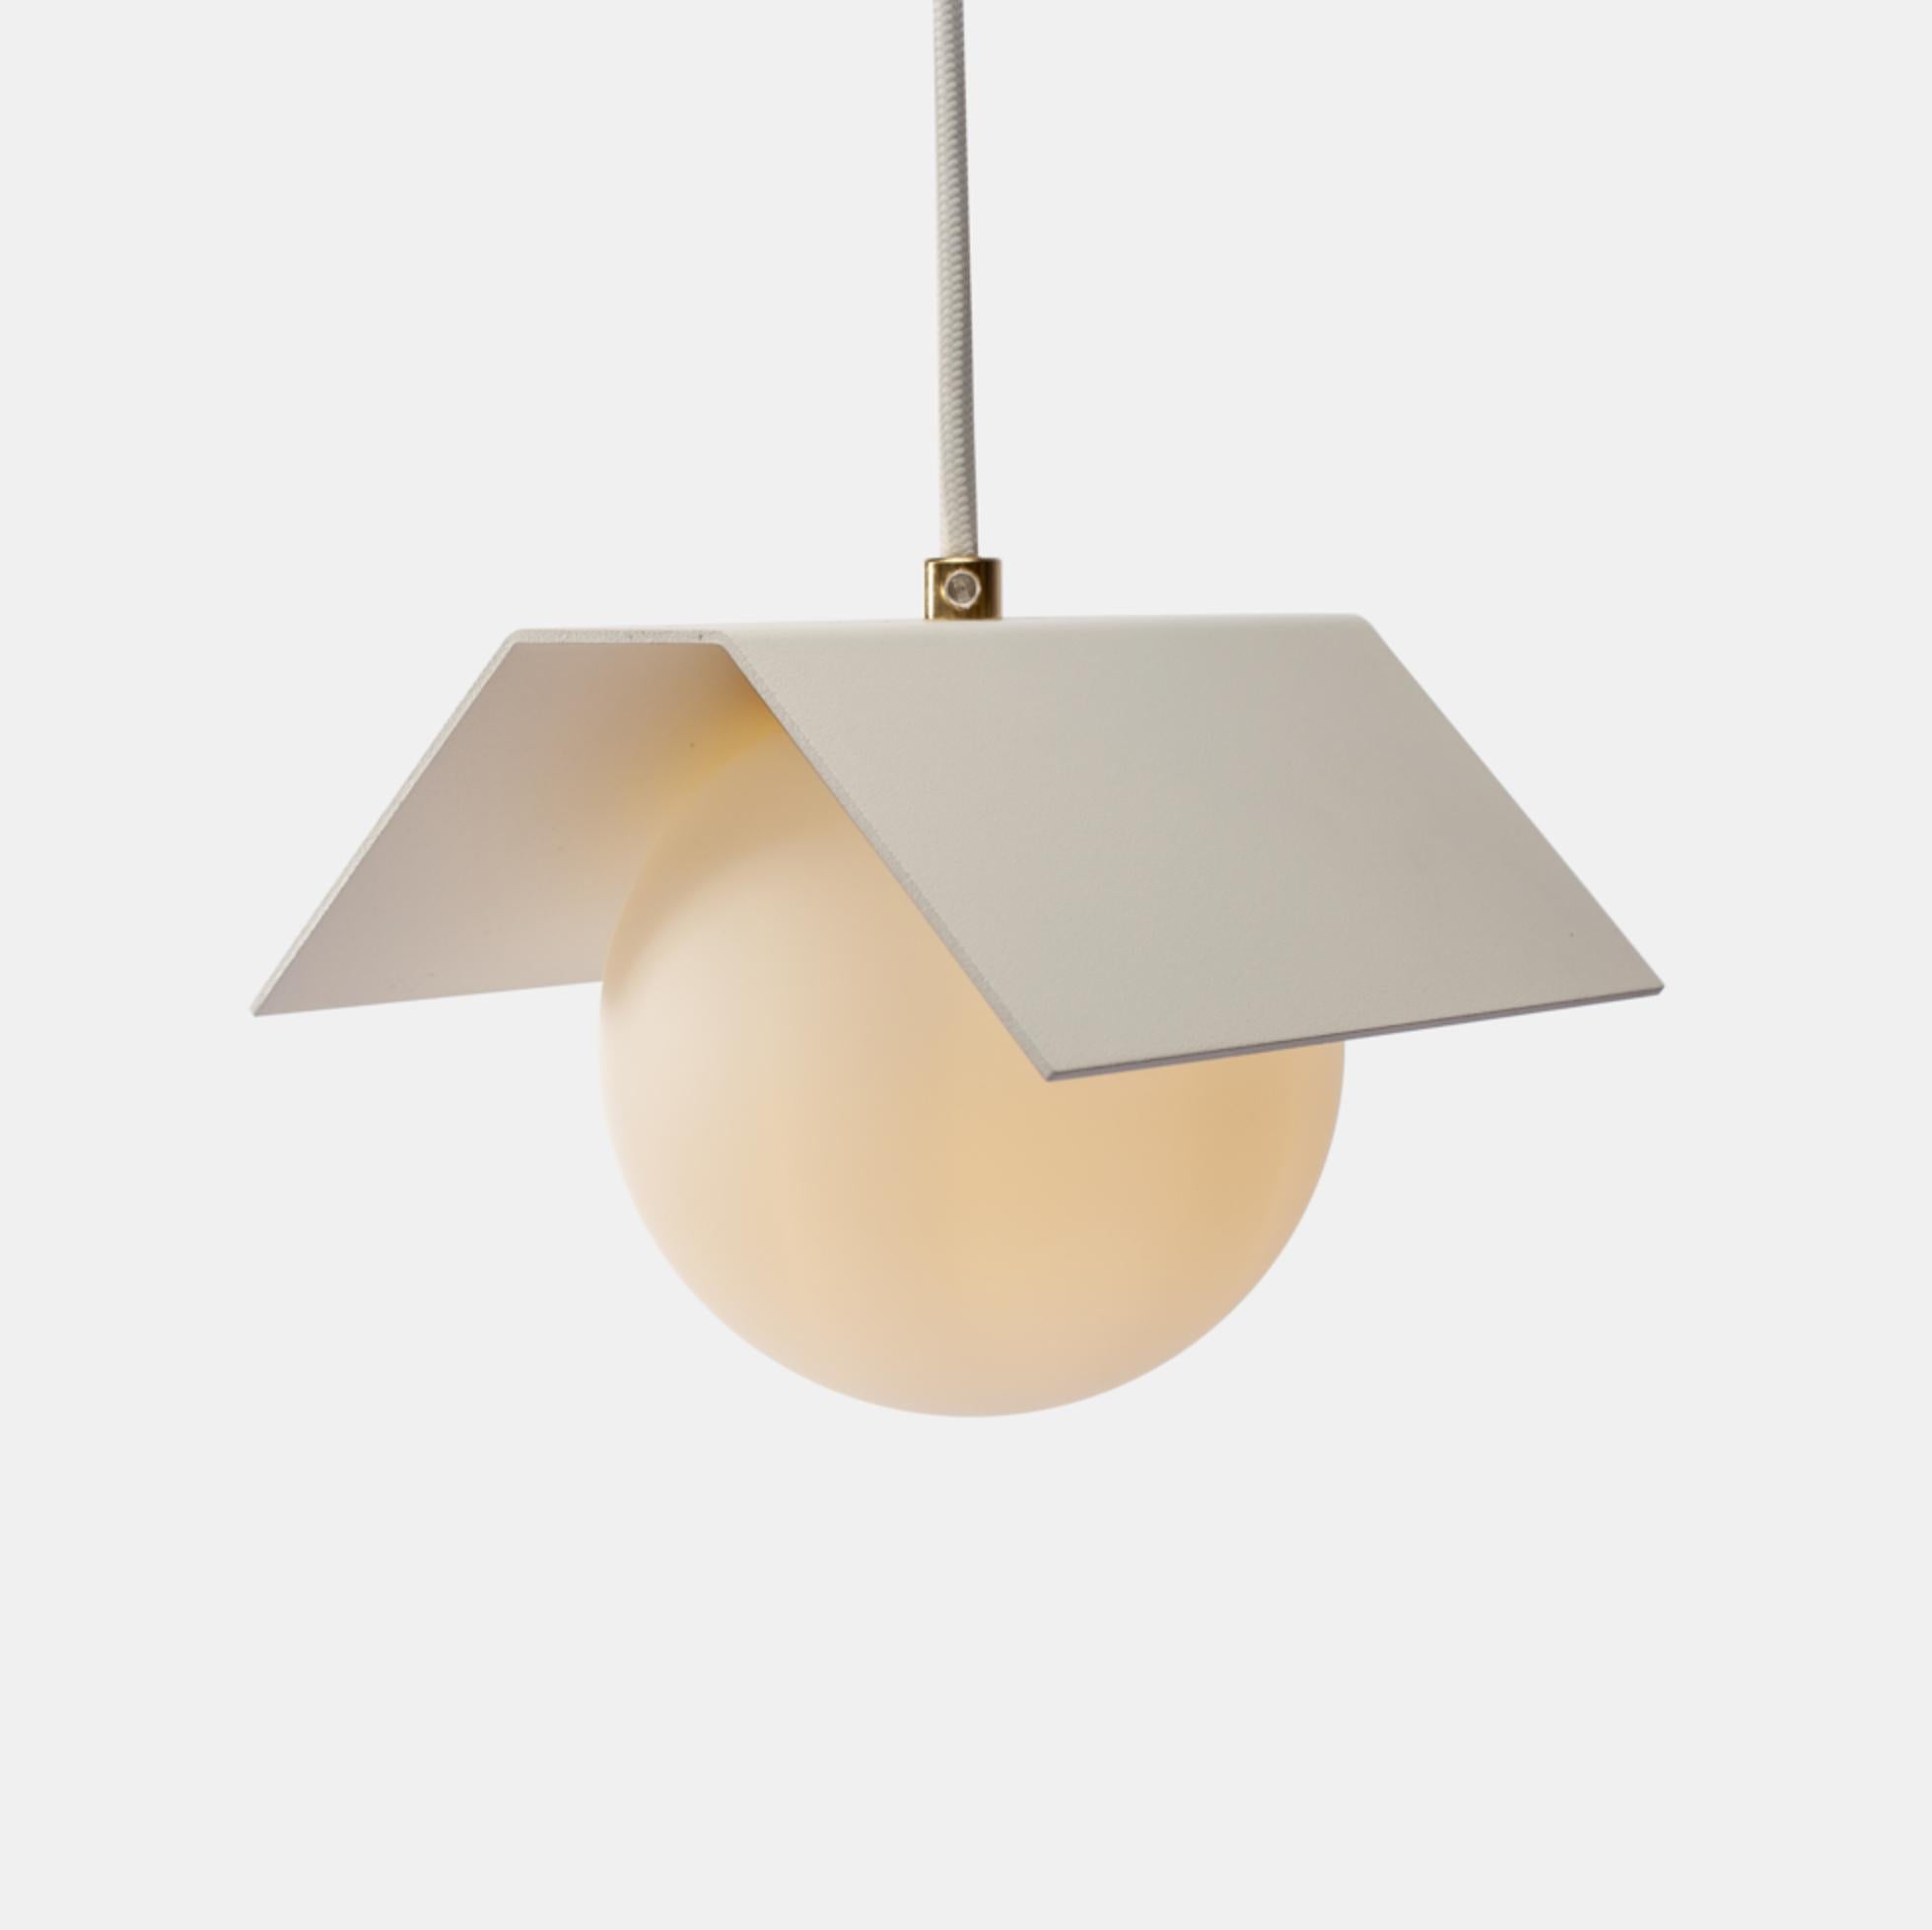 Twain Ex pure white suspended light by Lexavala
Dimensions: W 16 x D 16 x H 13 cm 
Materials: brass or stainless steel ring touching the glass.

There are two lenghts of socket covers, extending over the LED. Two short are to be found in